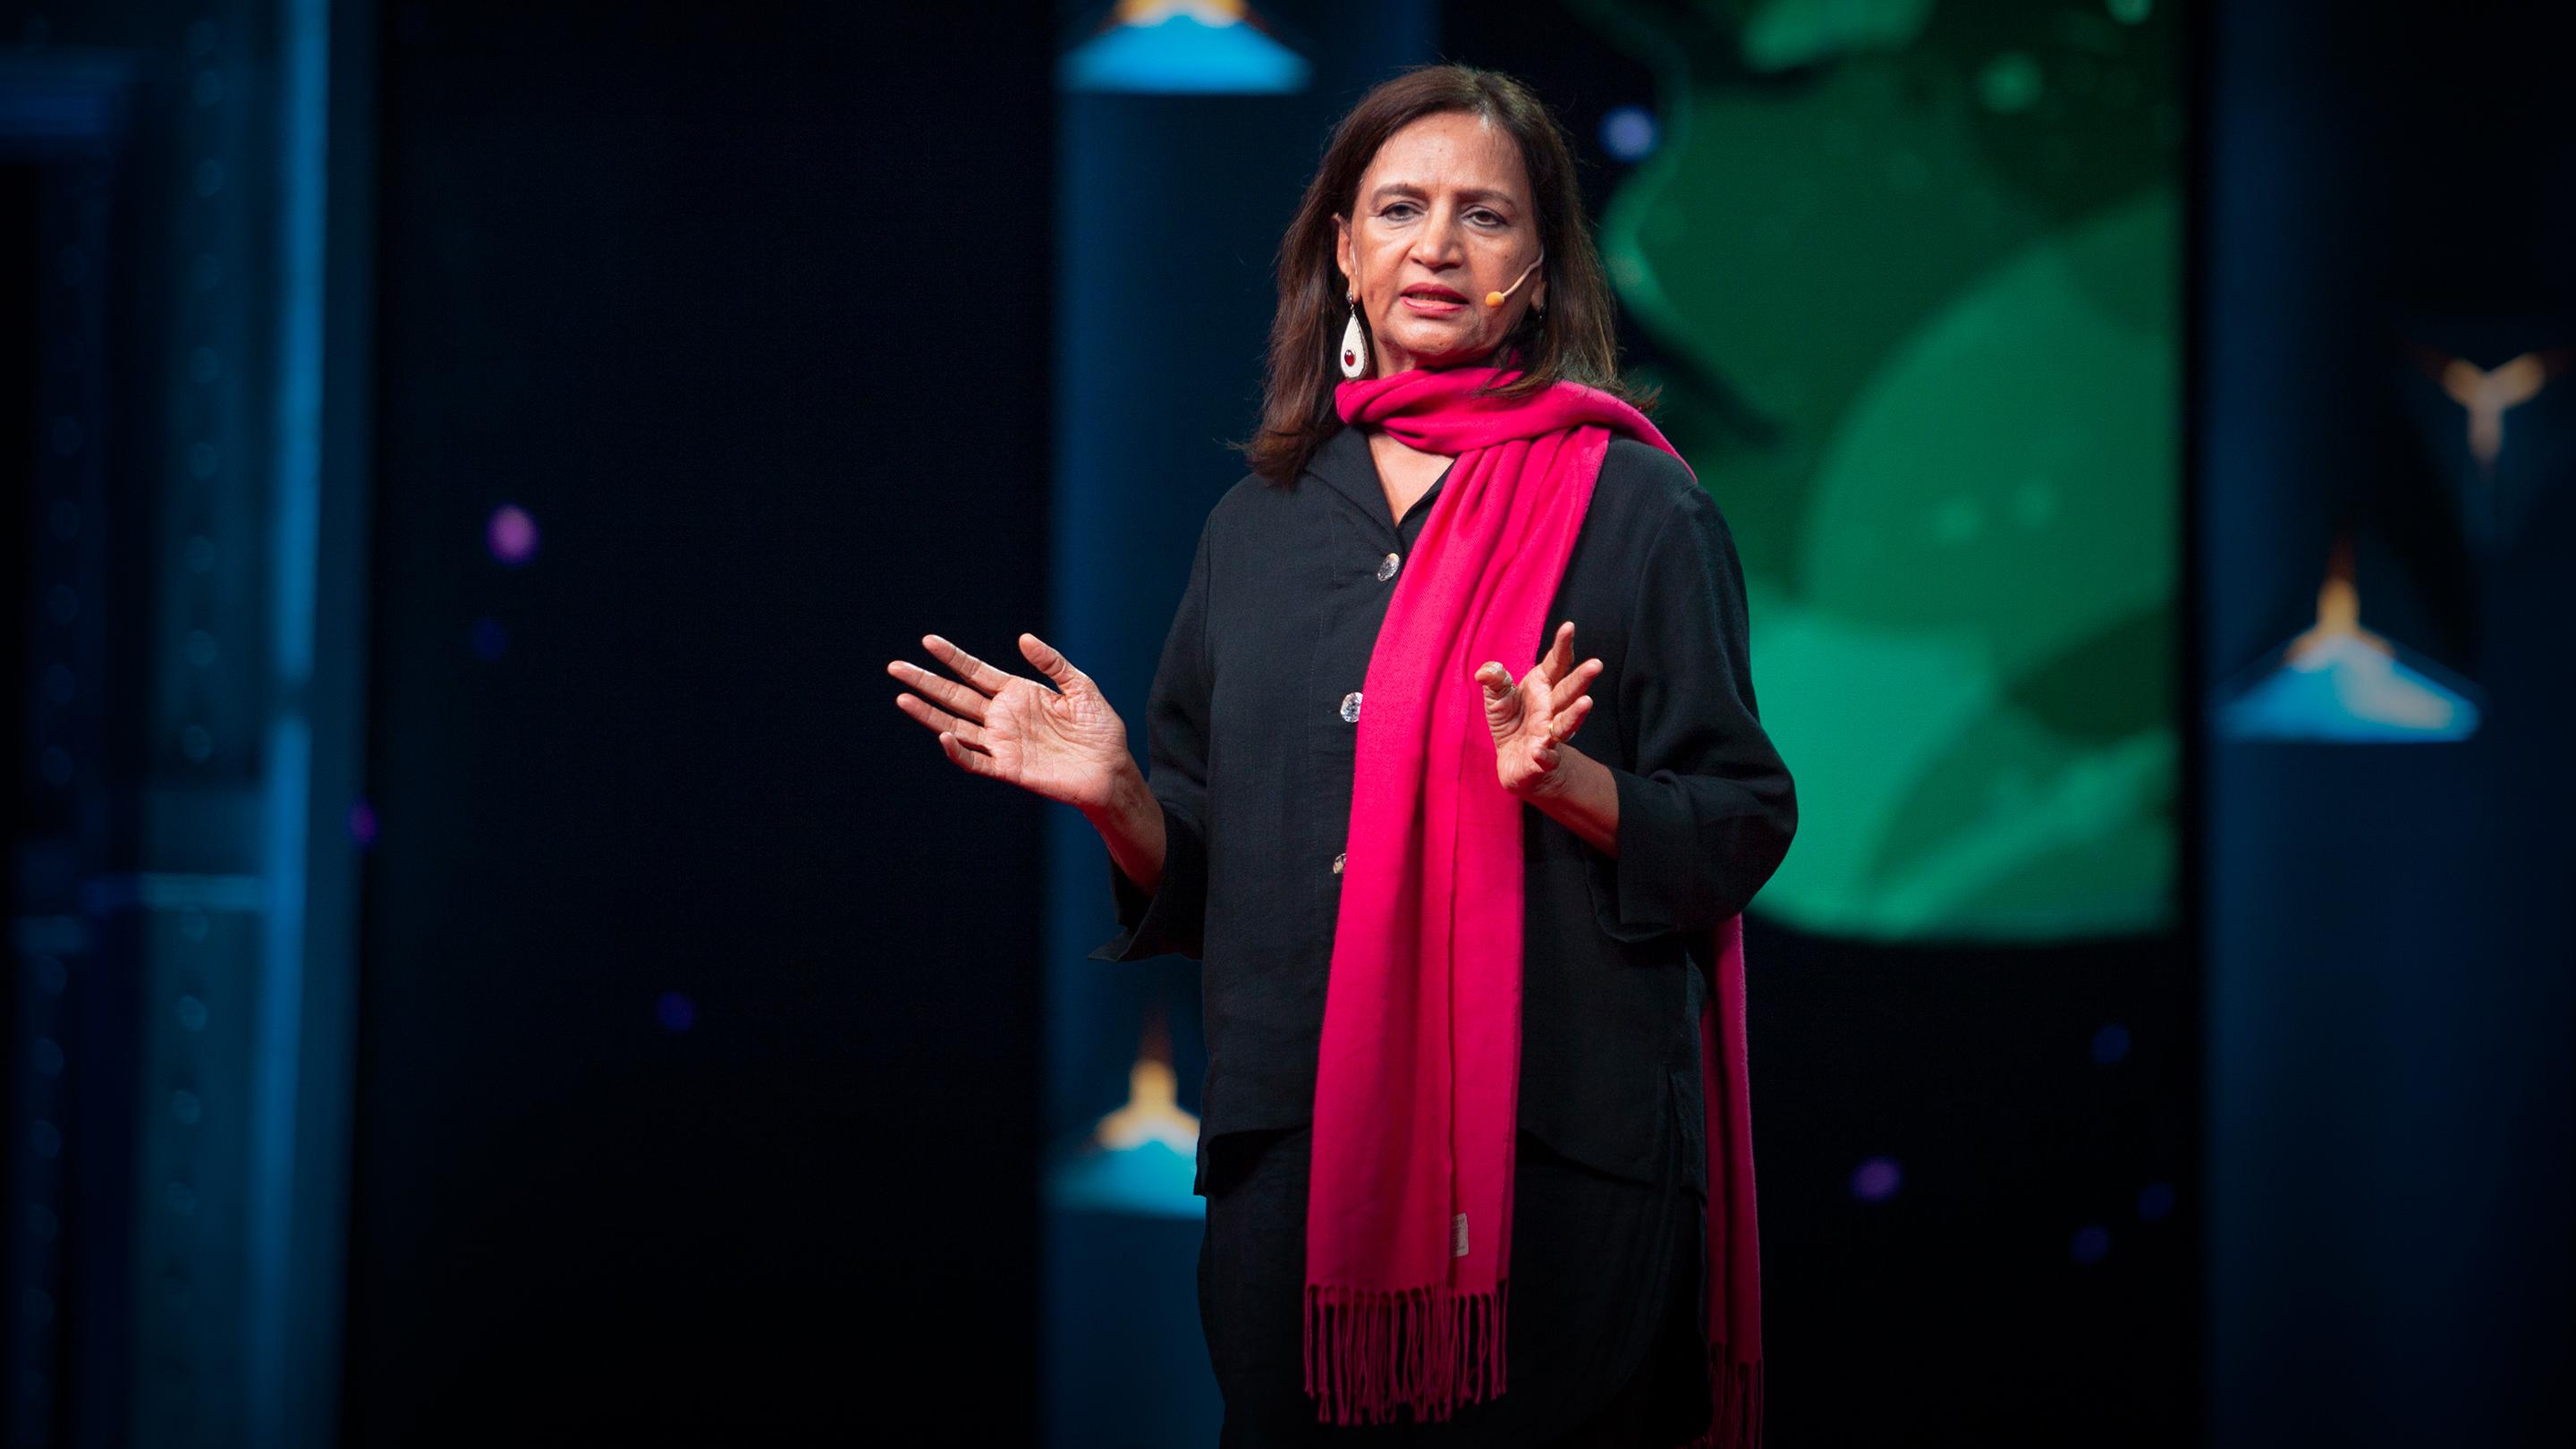 7 beliefs that can silence women -- and how to unlearn them | Deepa Narayan